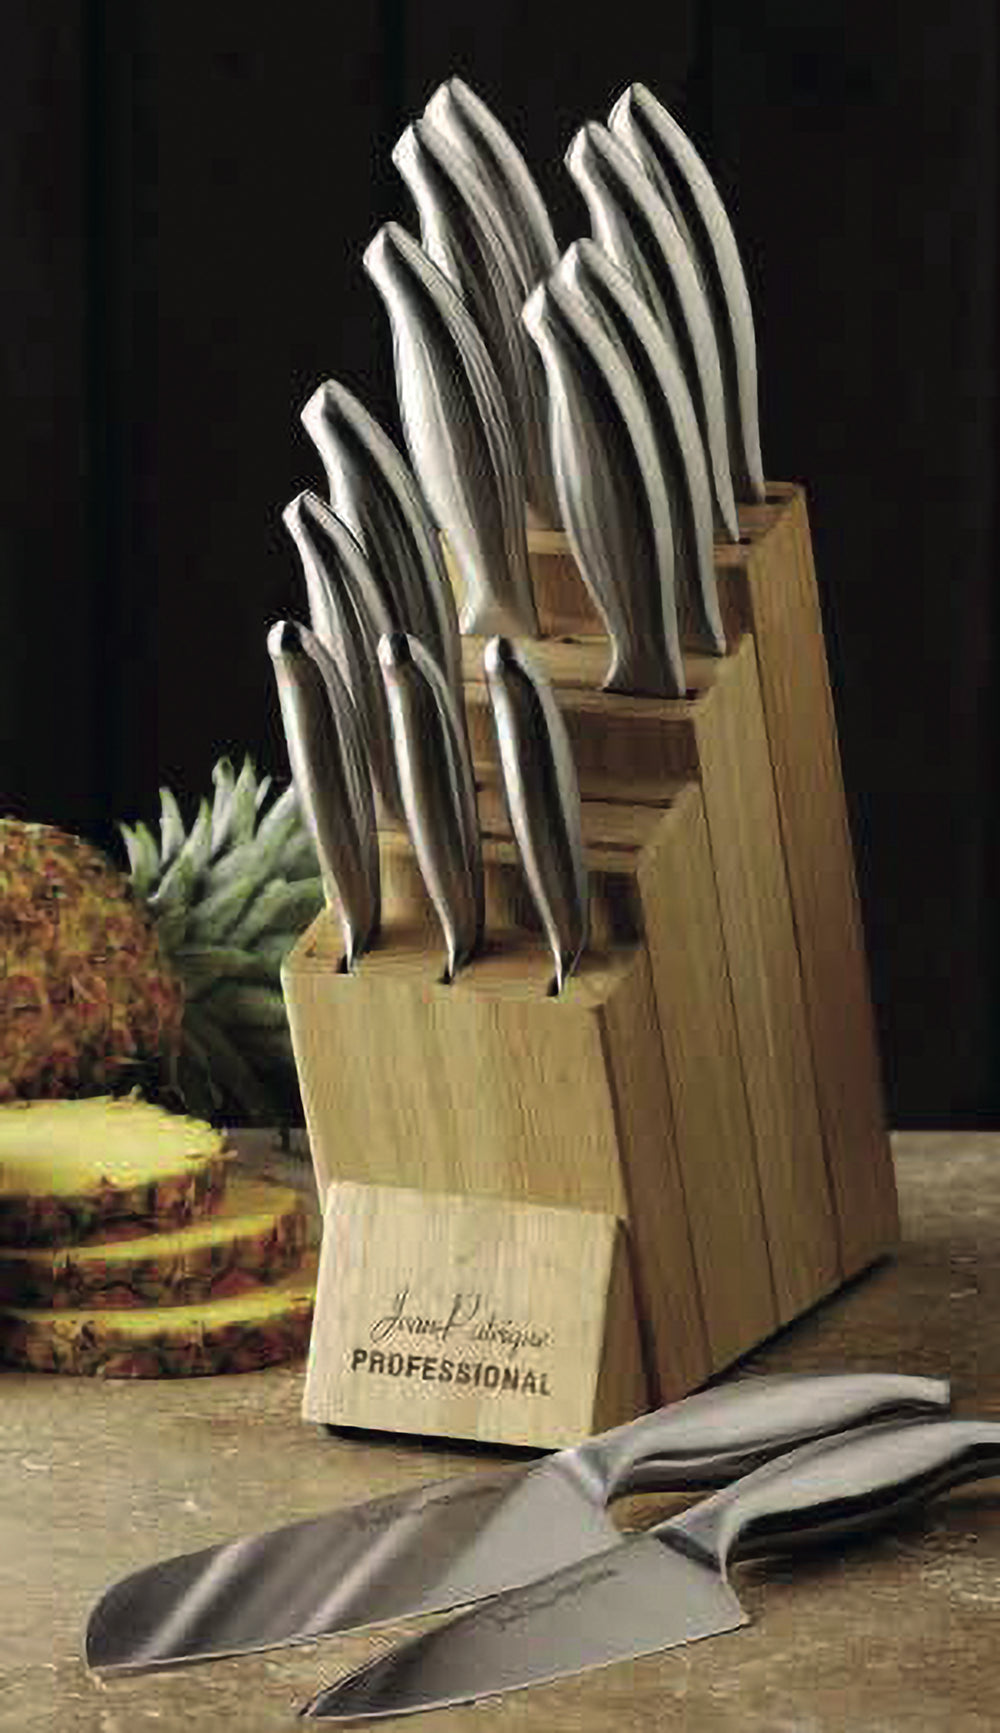 Onyx Collection 14 Piece Knife Set with Wooden Block – Jean Patrique  Professional Cookware